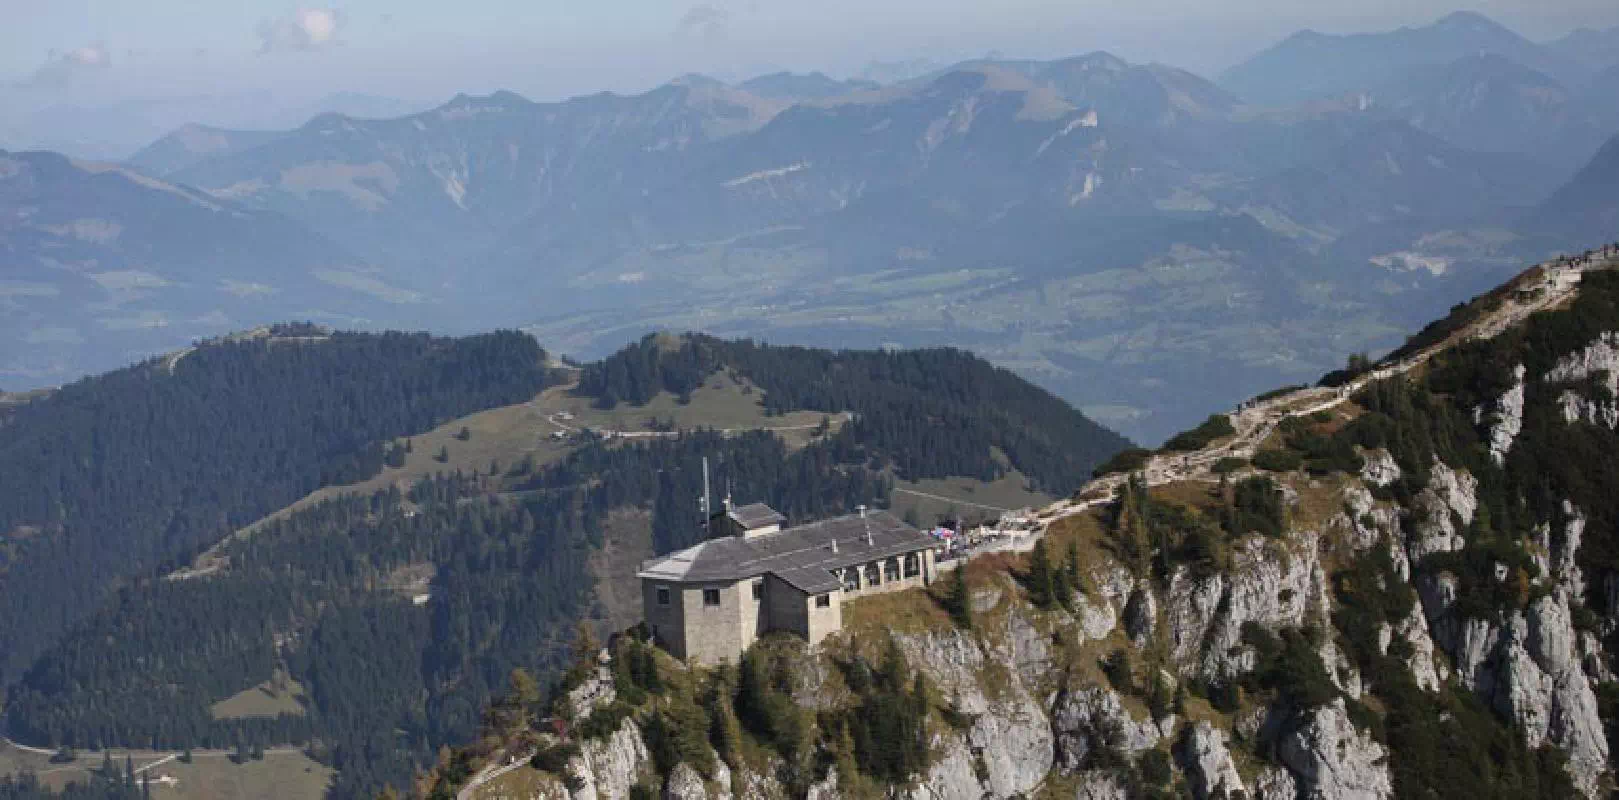 Bavarian Mountains Day Tour with Salt Mines and Eagle's Nest Visit from Salzburg